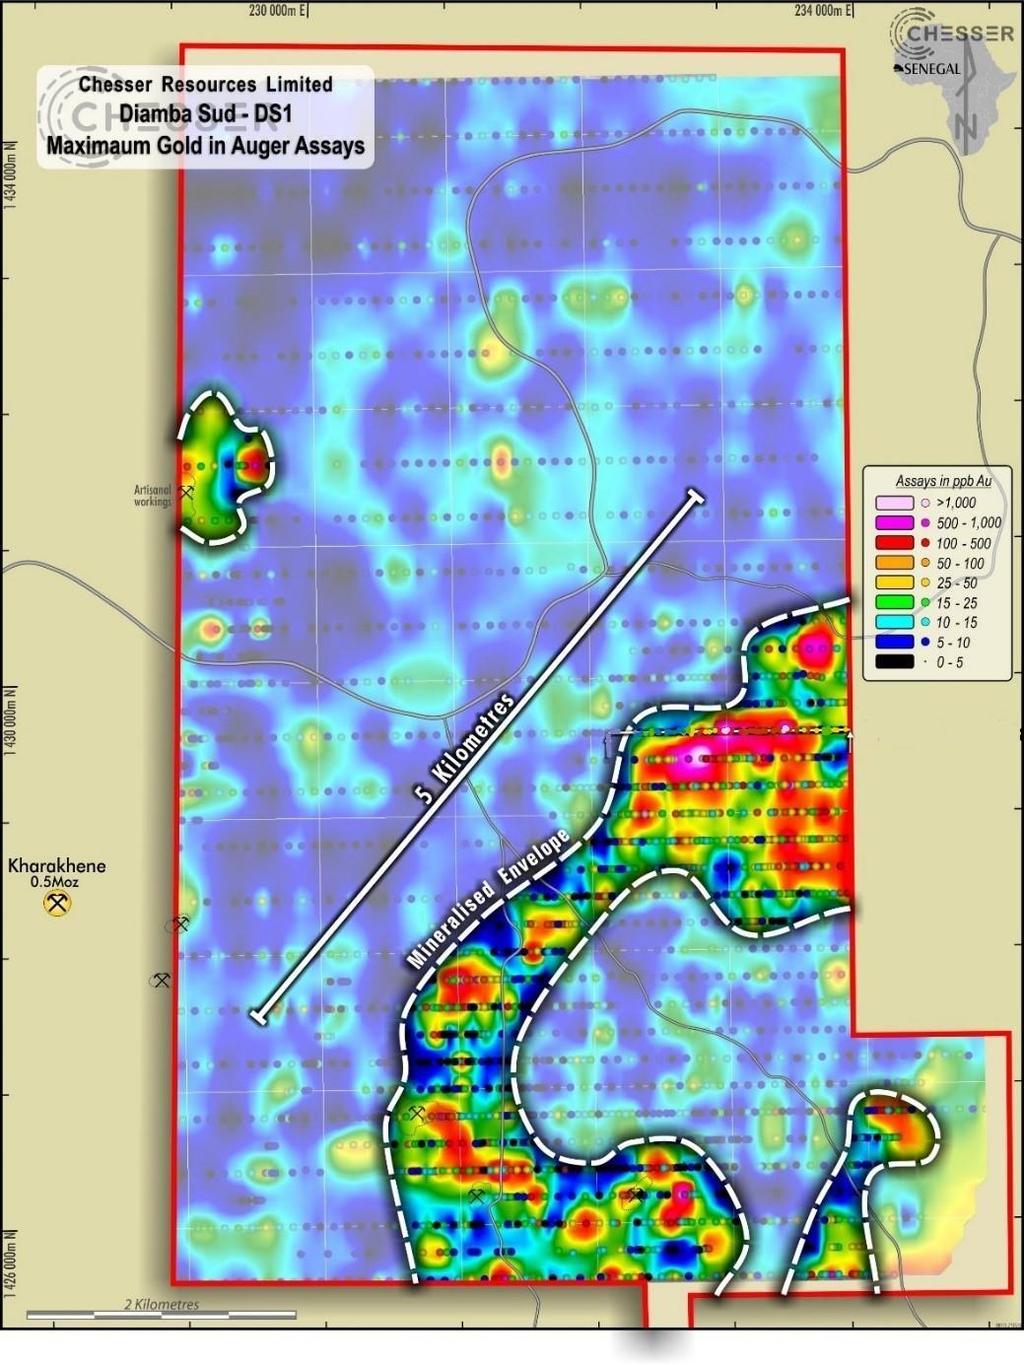 Upcoming Drilling at Diamba Sud Diamba Sud is a significant geochemical gold anomaly coinciding with limited artisanal mine workings and no deep drilling in the strongest northern part of the